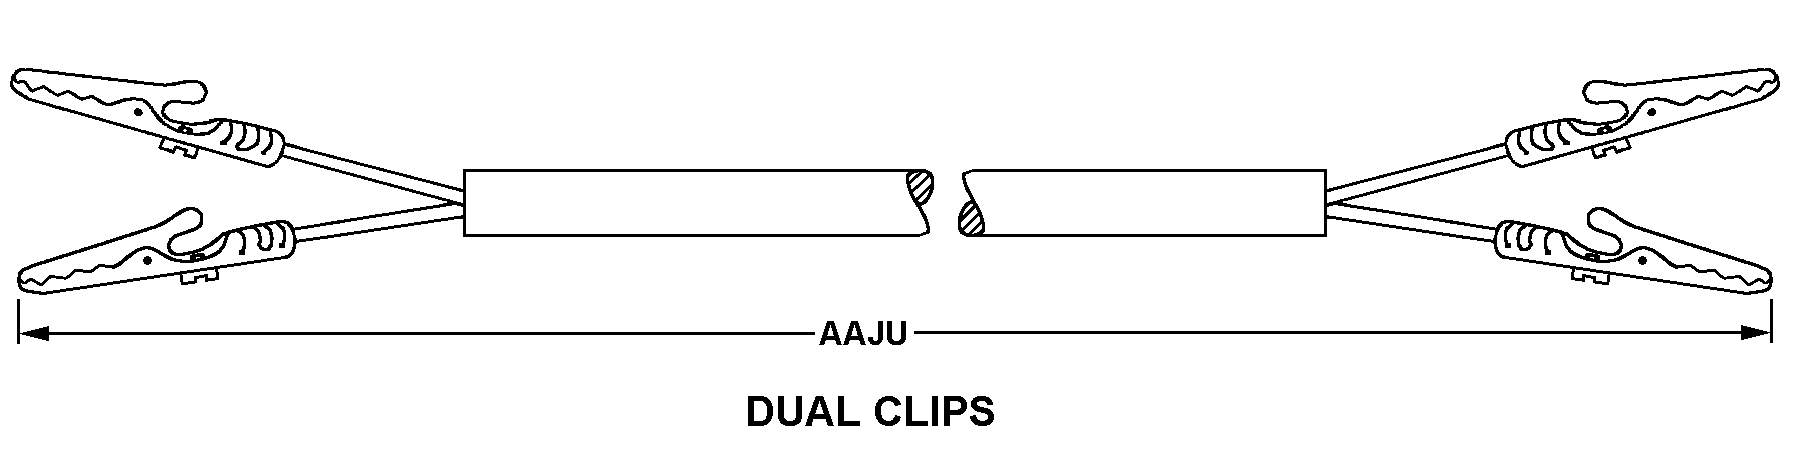 DUAL CLIPS style nsn 6020-01-530-0629